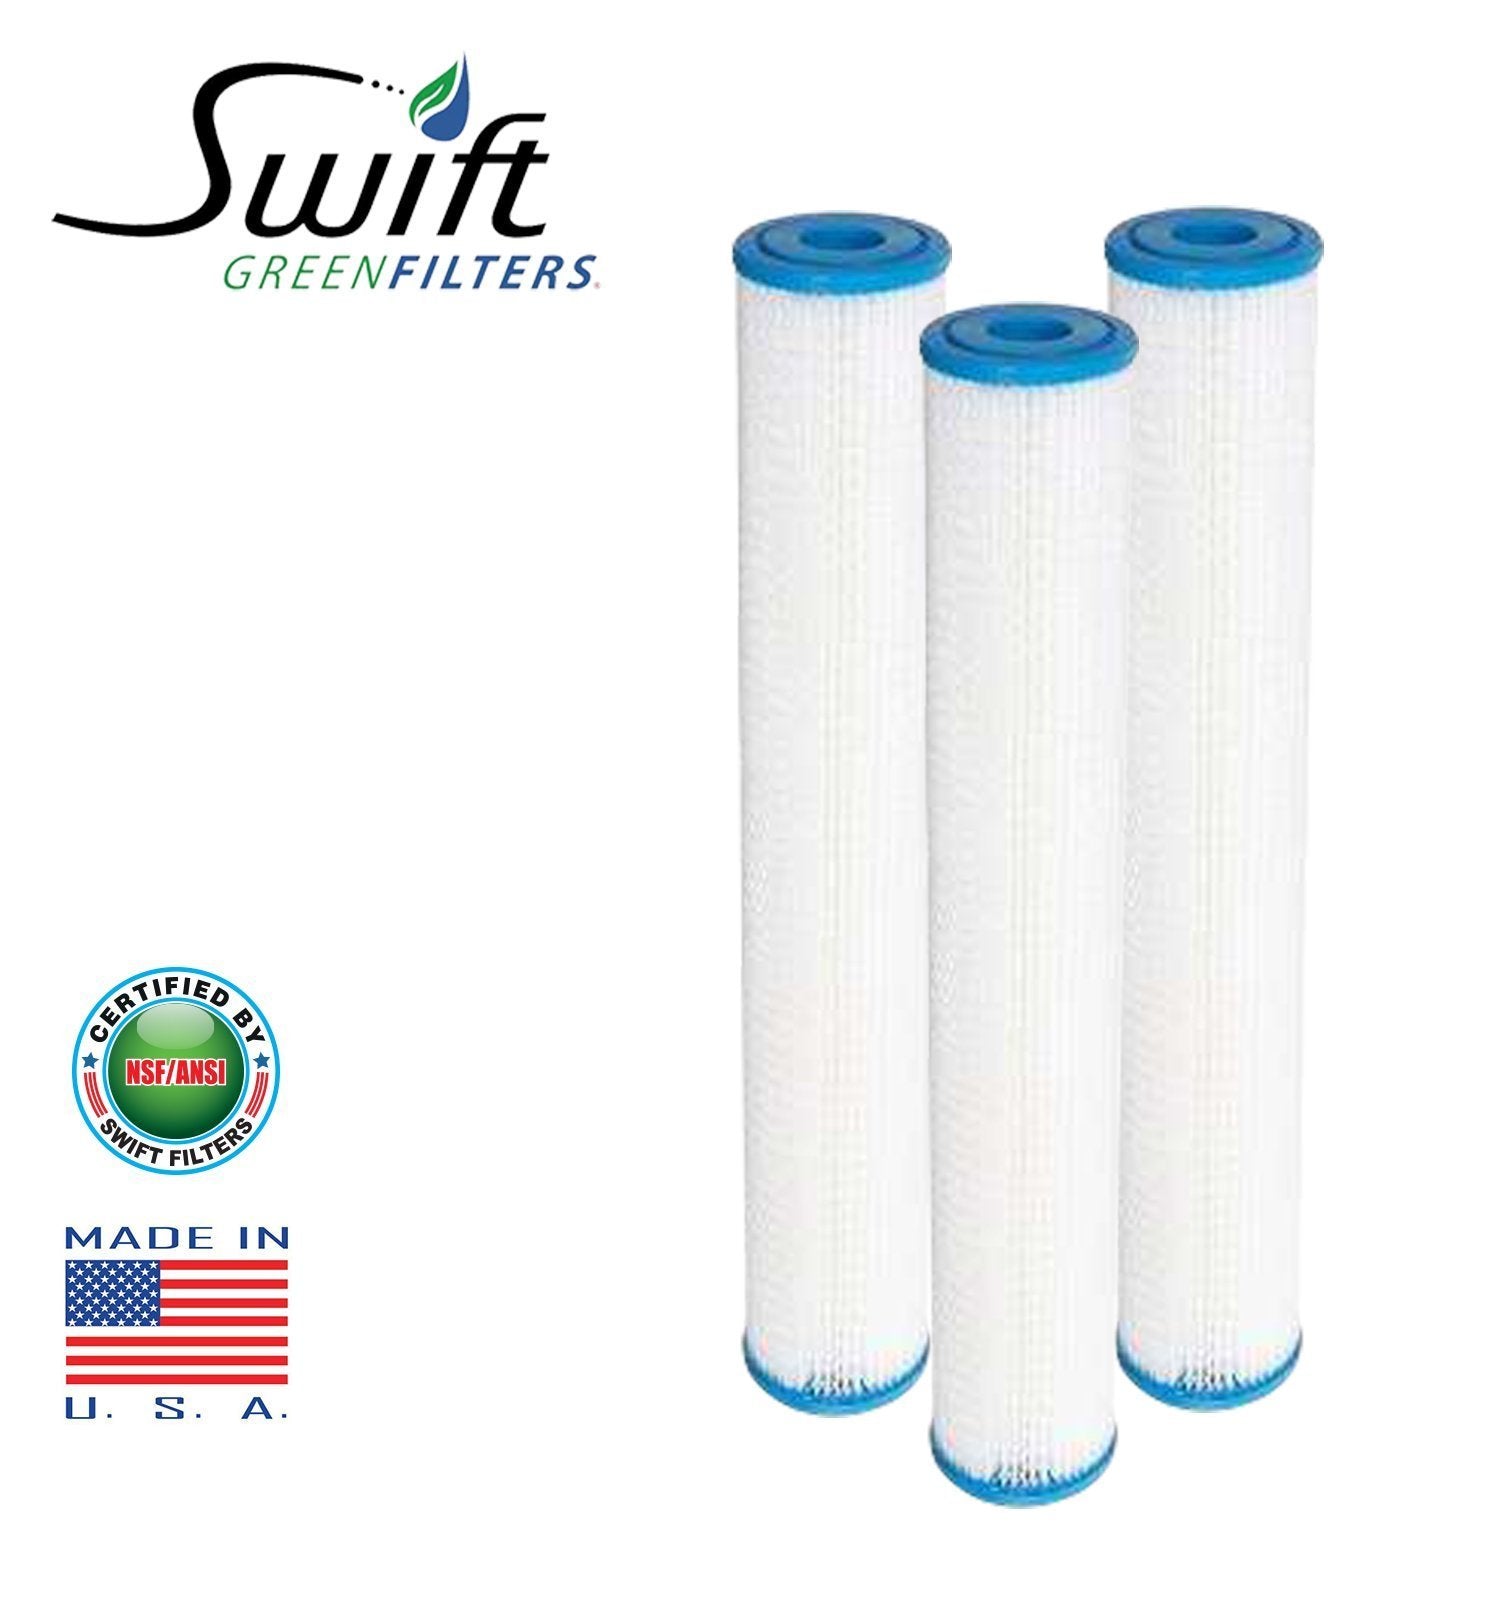 5 Micron Polyester Pleated Washable Sediment Water Filter 2.5" x 20" by Swift Green Filters - The Filters Club